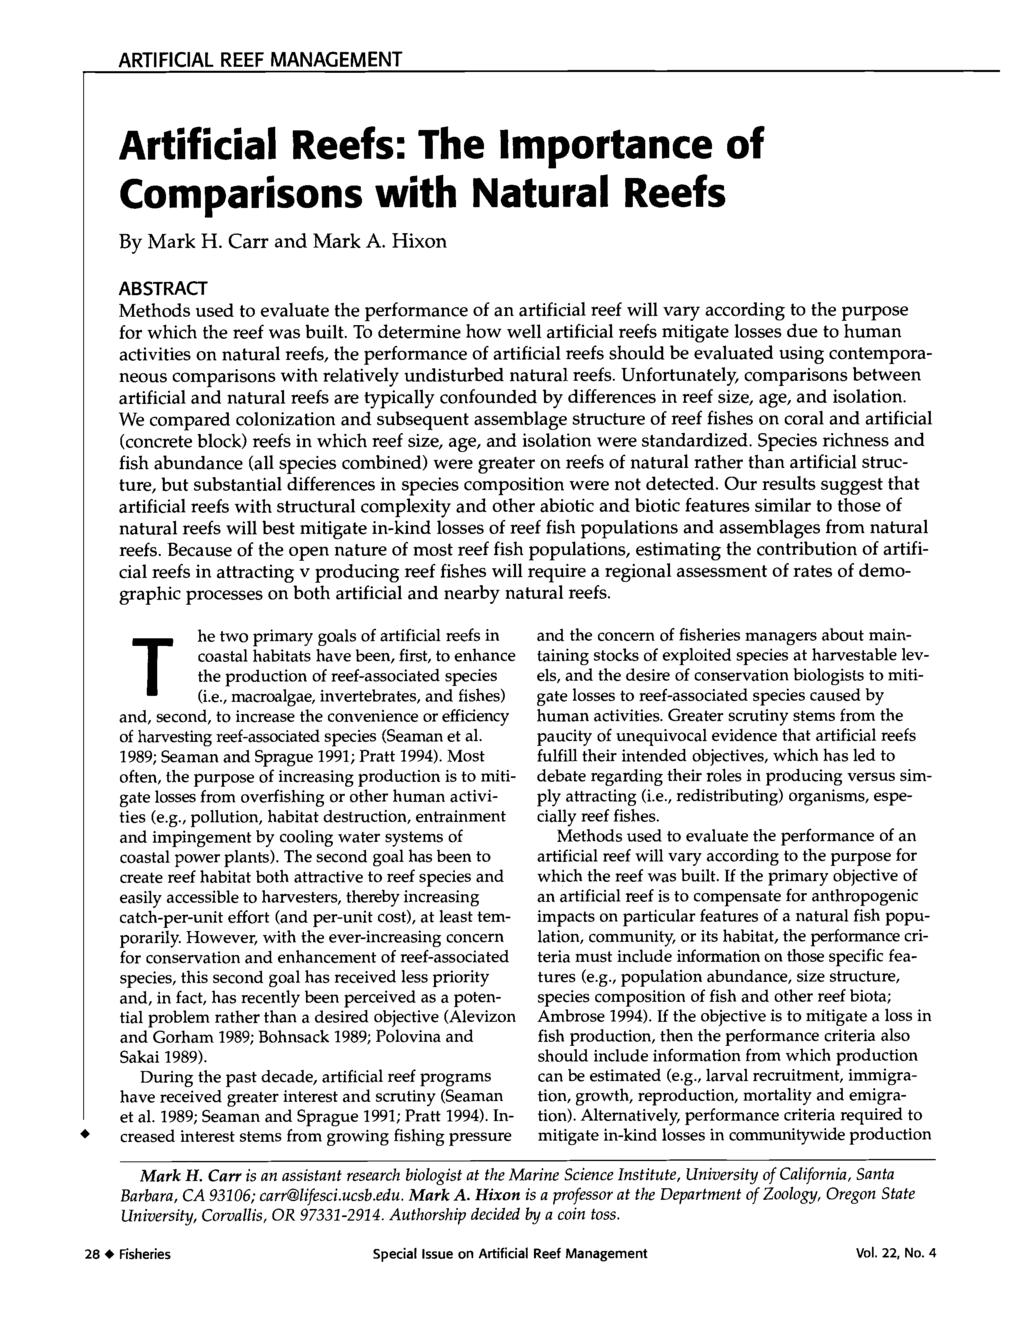 Artificial Reefs: The Importance of Comparisons with Natural Reefs By Mark H. Carr and Mark A.